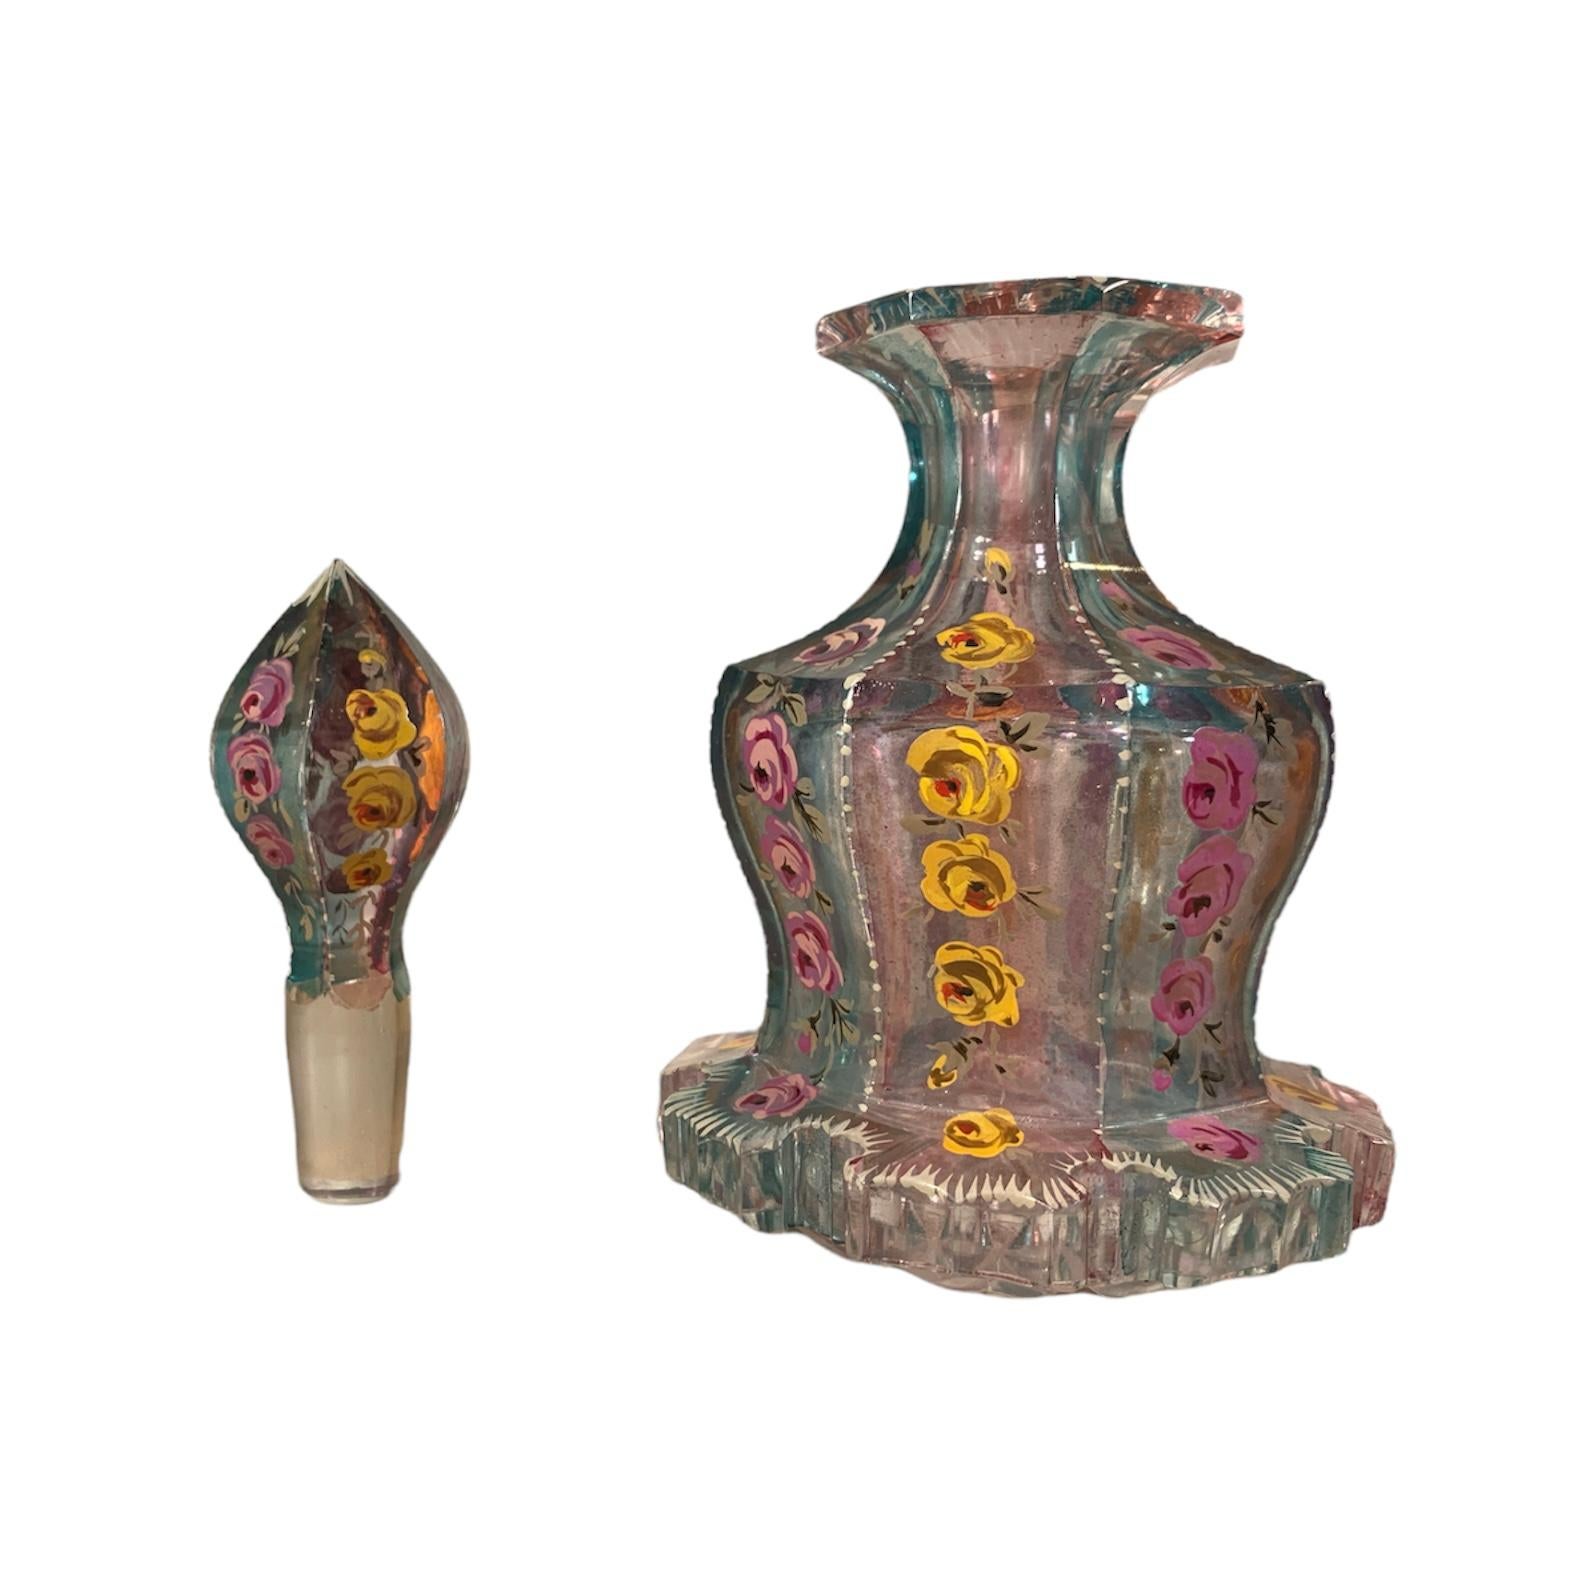 Antique Bohemian Enameled Galss Perfume Bottle, 19th Century Crystal In Good Condition For Sale In Rostock, MV